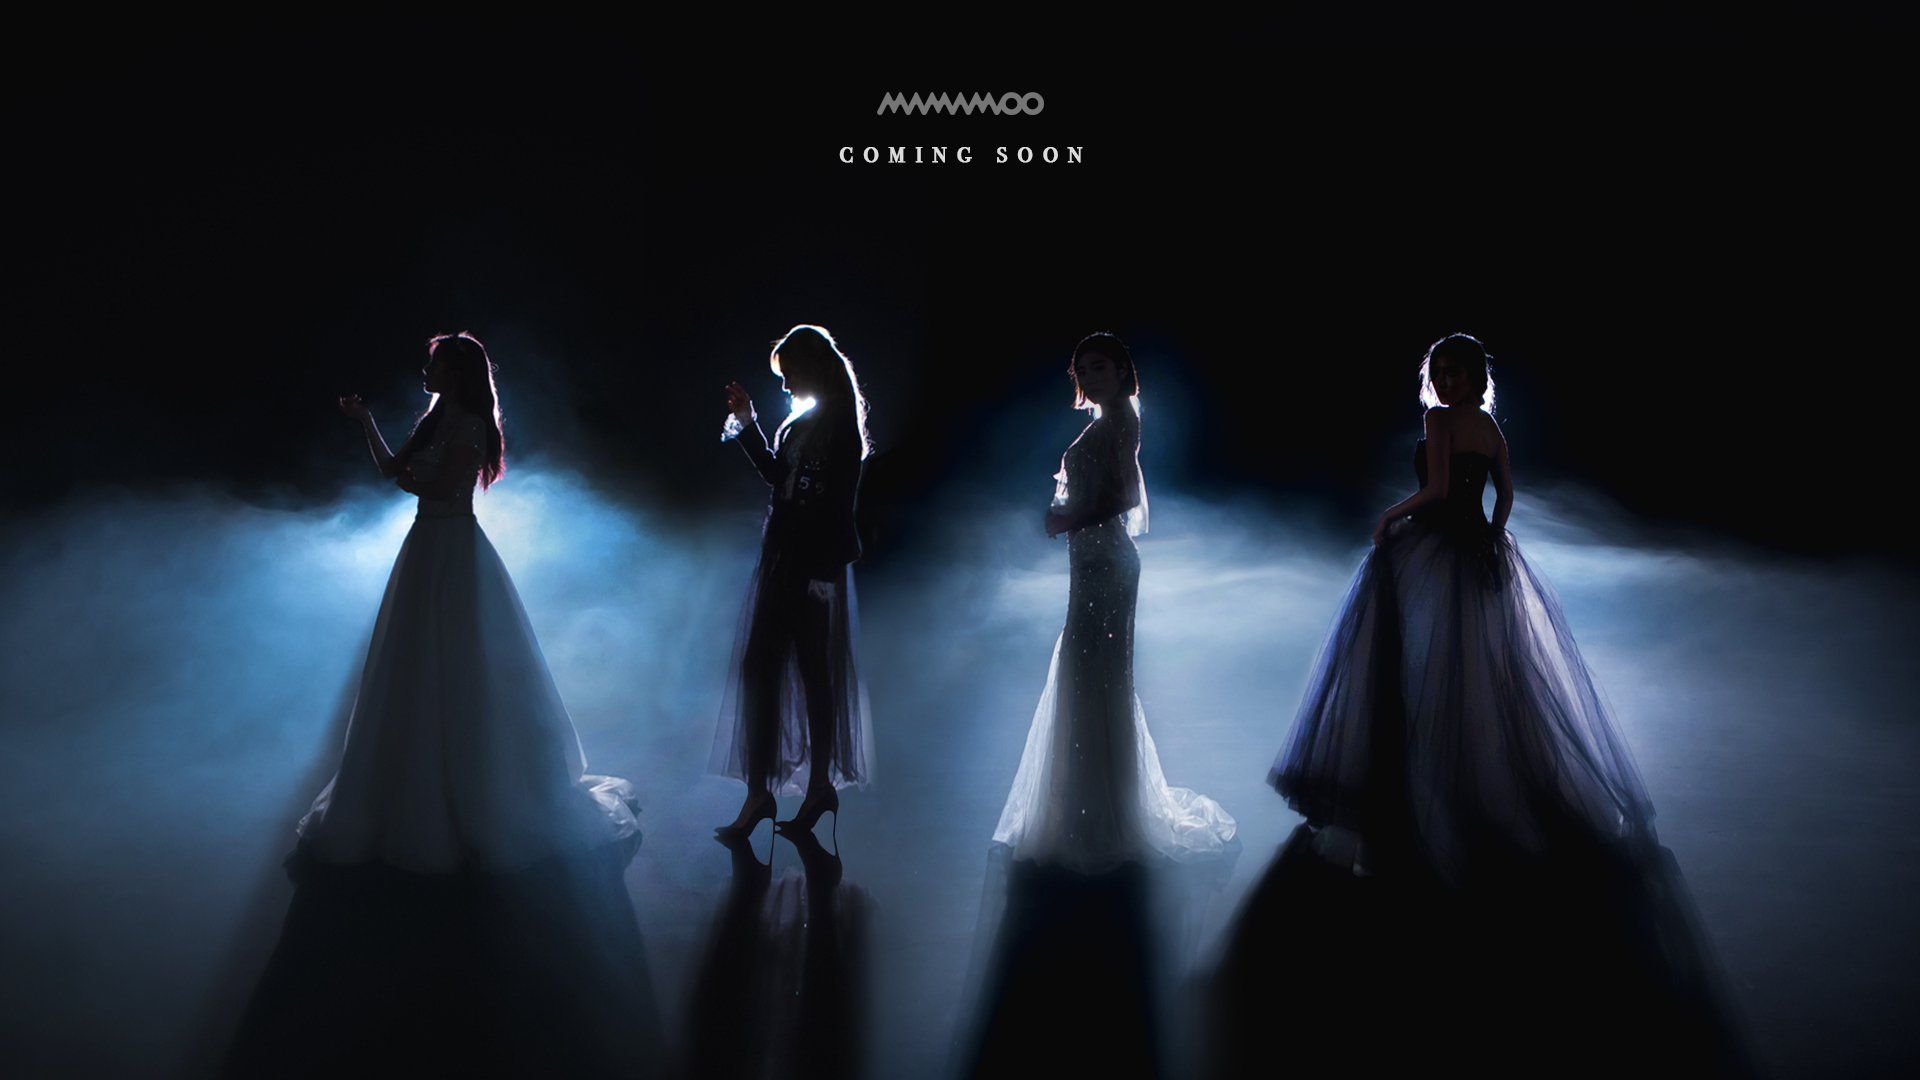 ᗪ. ᴍᴏᴏɴꜱᴜɴ ᴀᴜ on hold still want mamamoo to do a royals concept